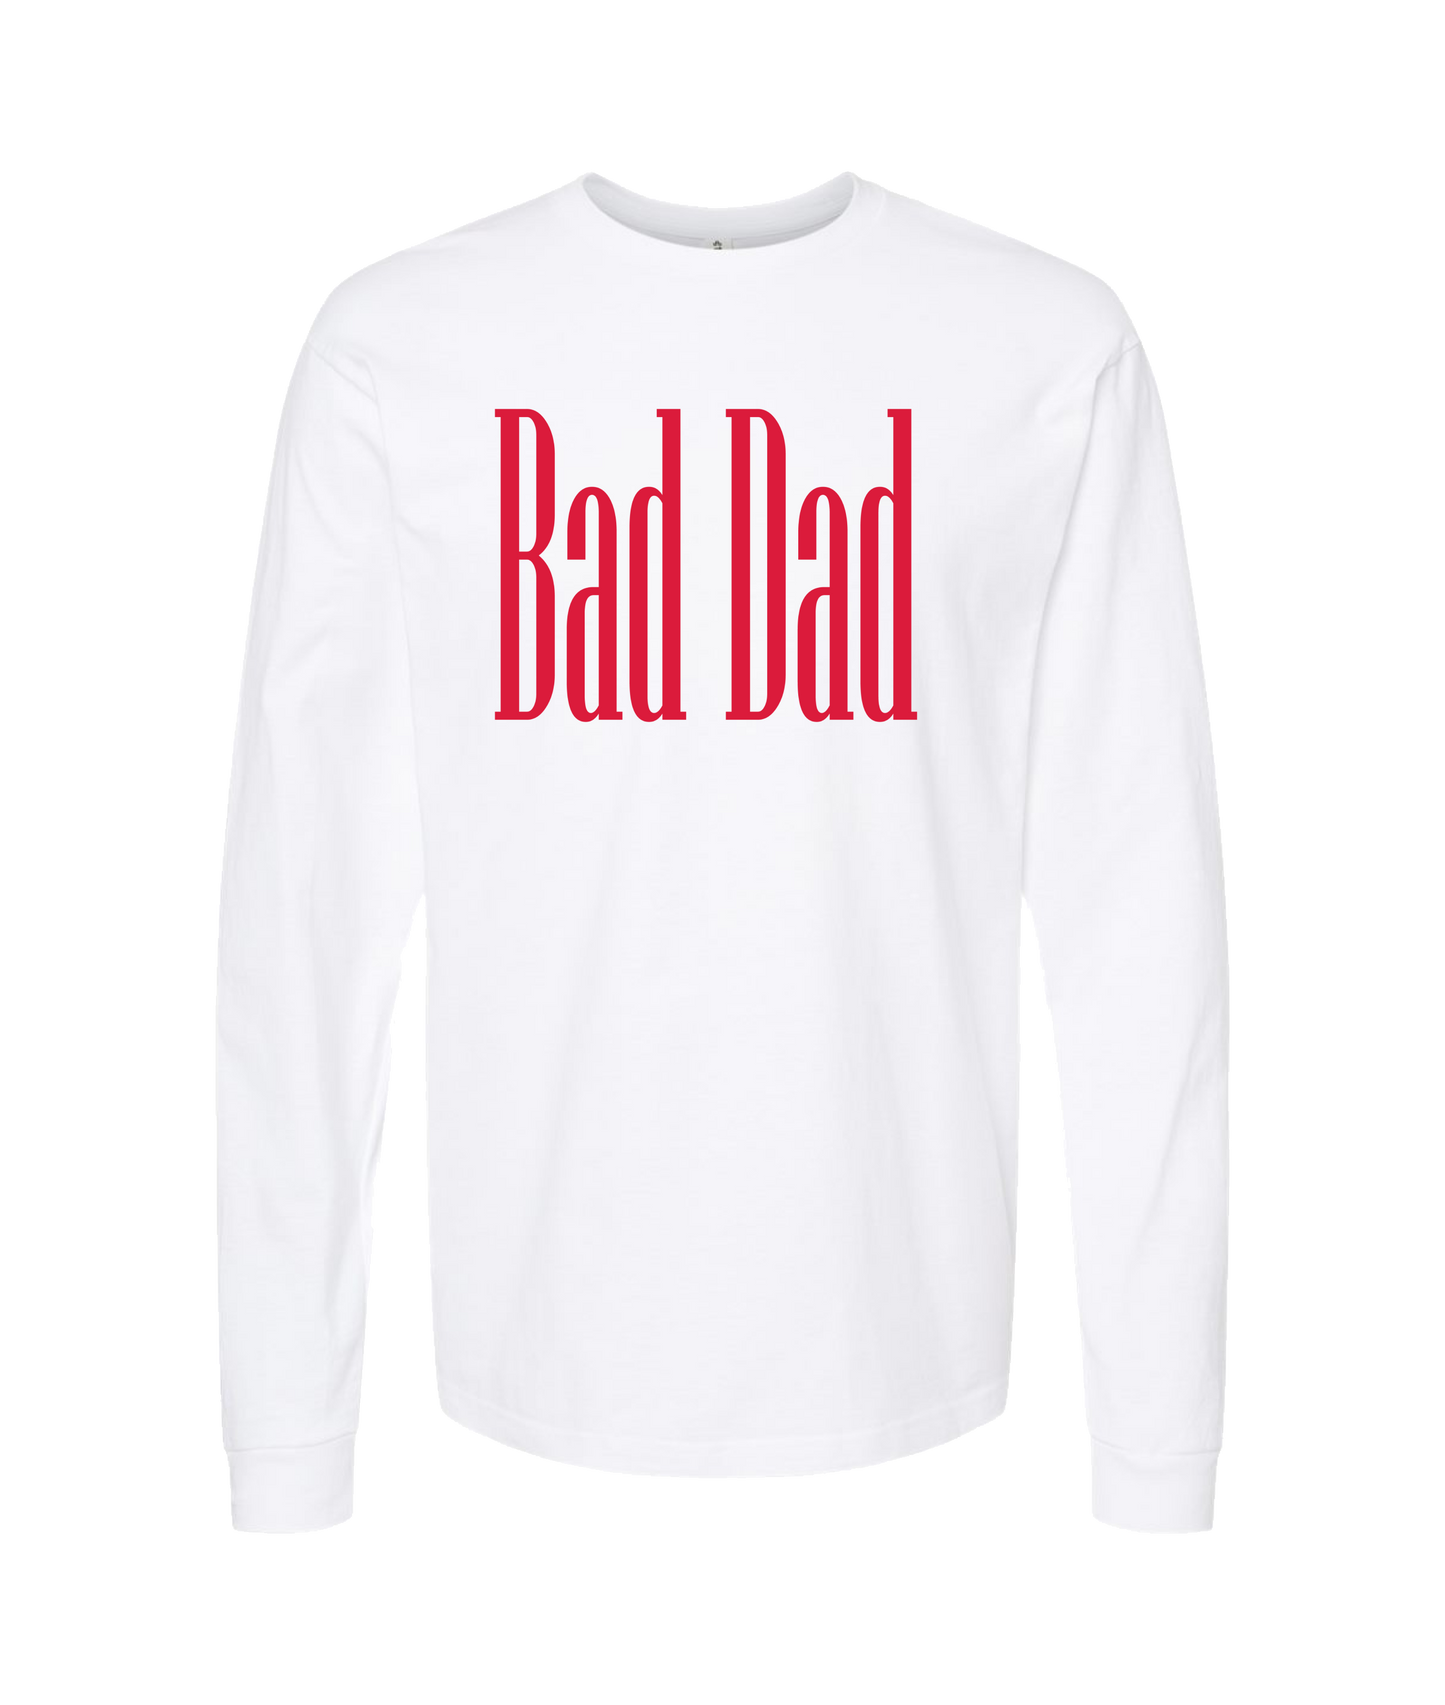 Bad Dad Guitar - Bad Dad Collection - White Long Sleeve T